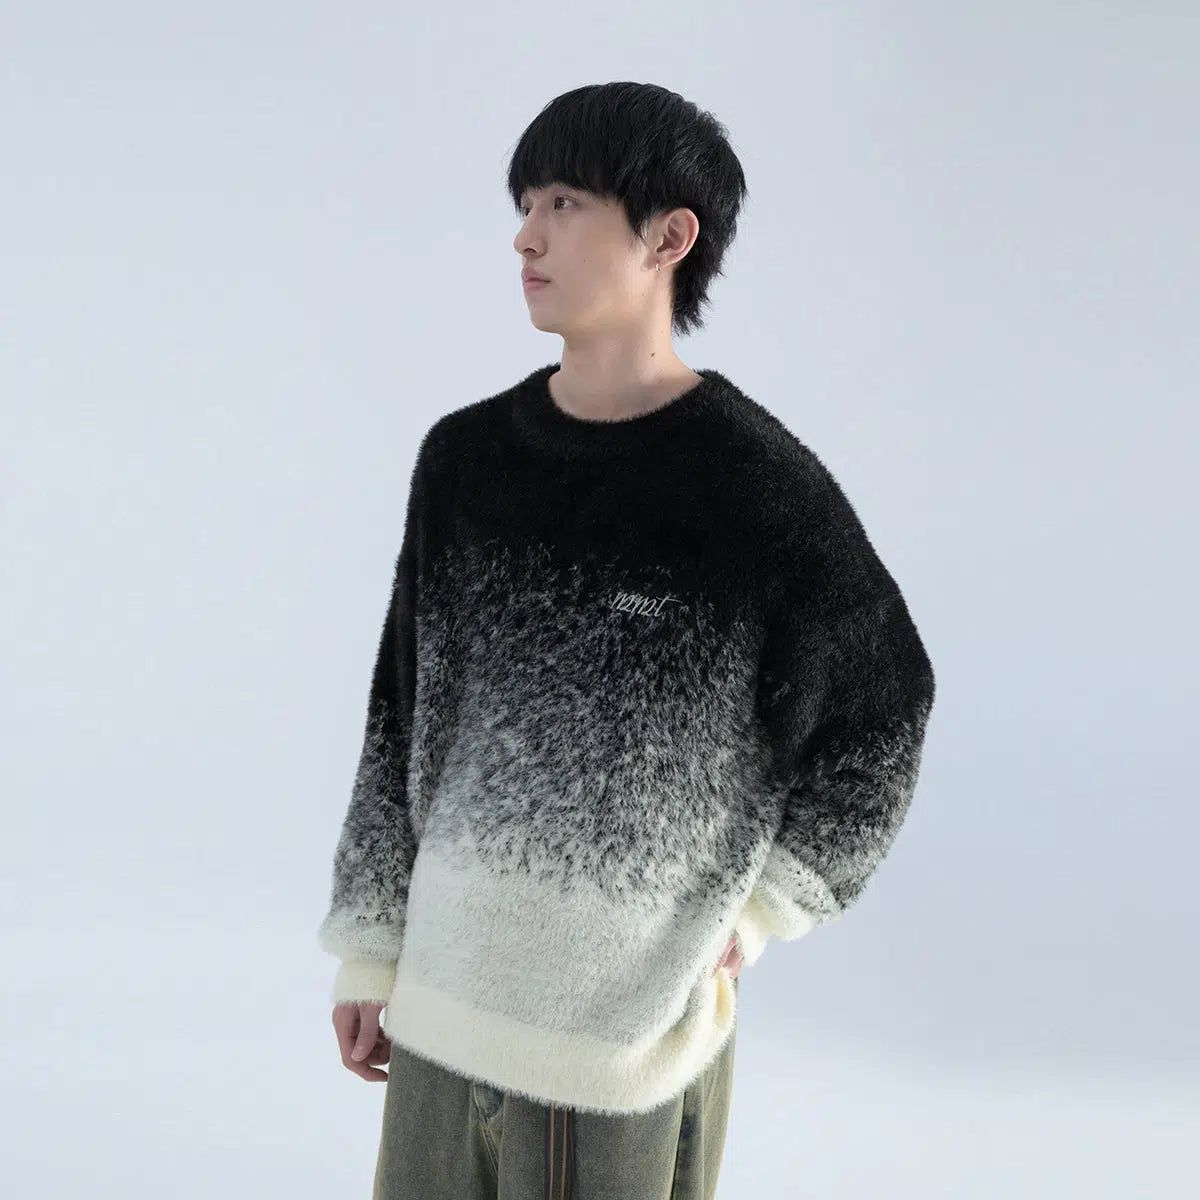 Gradient Effect Fuzzy Sweater Korean Street Fashion Sweater By Mentmate Shop Online at OH Vault